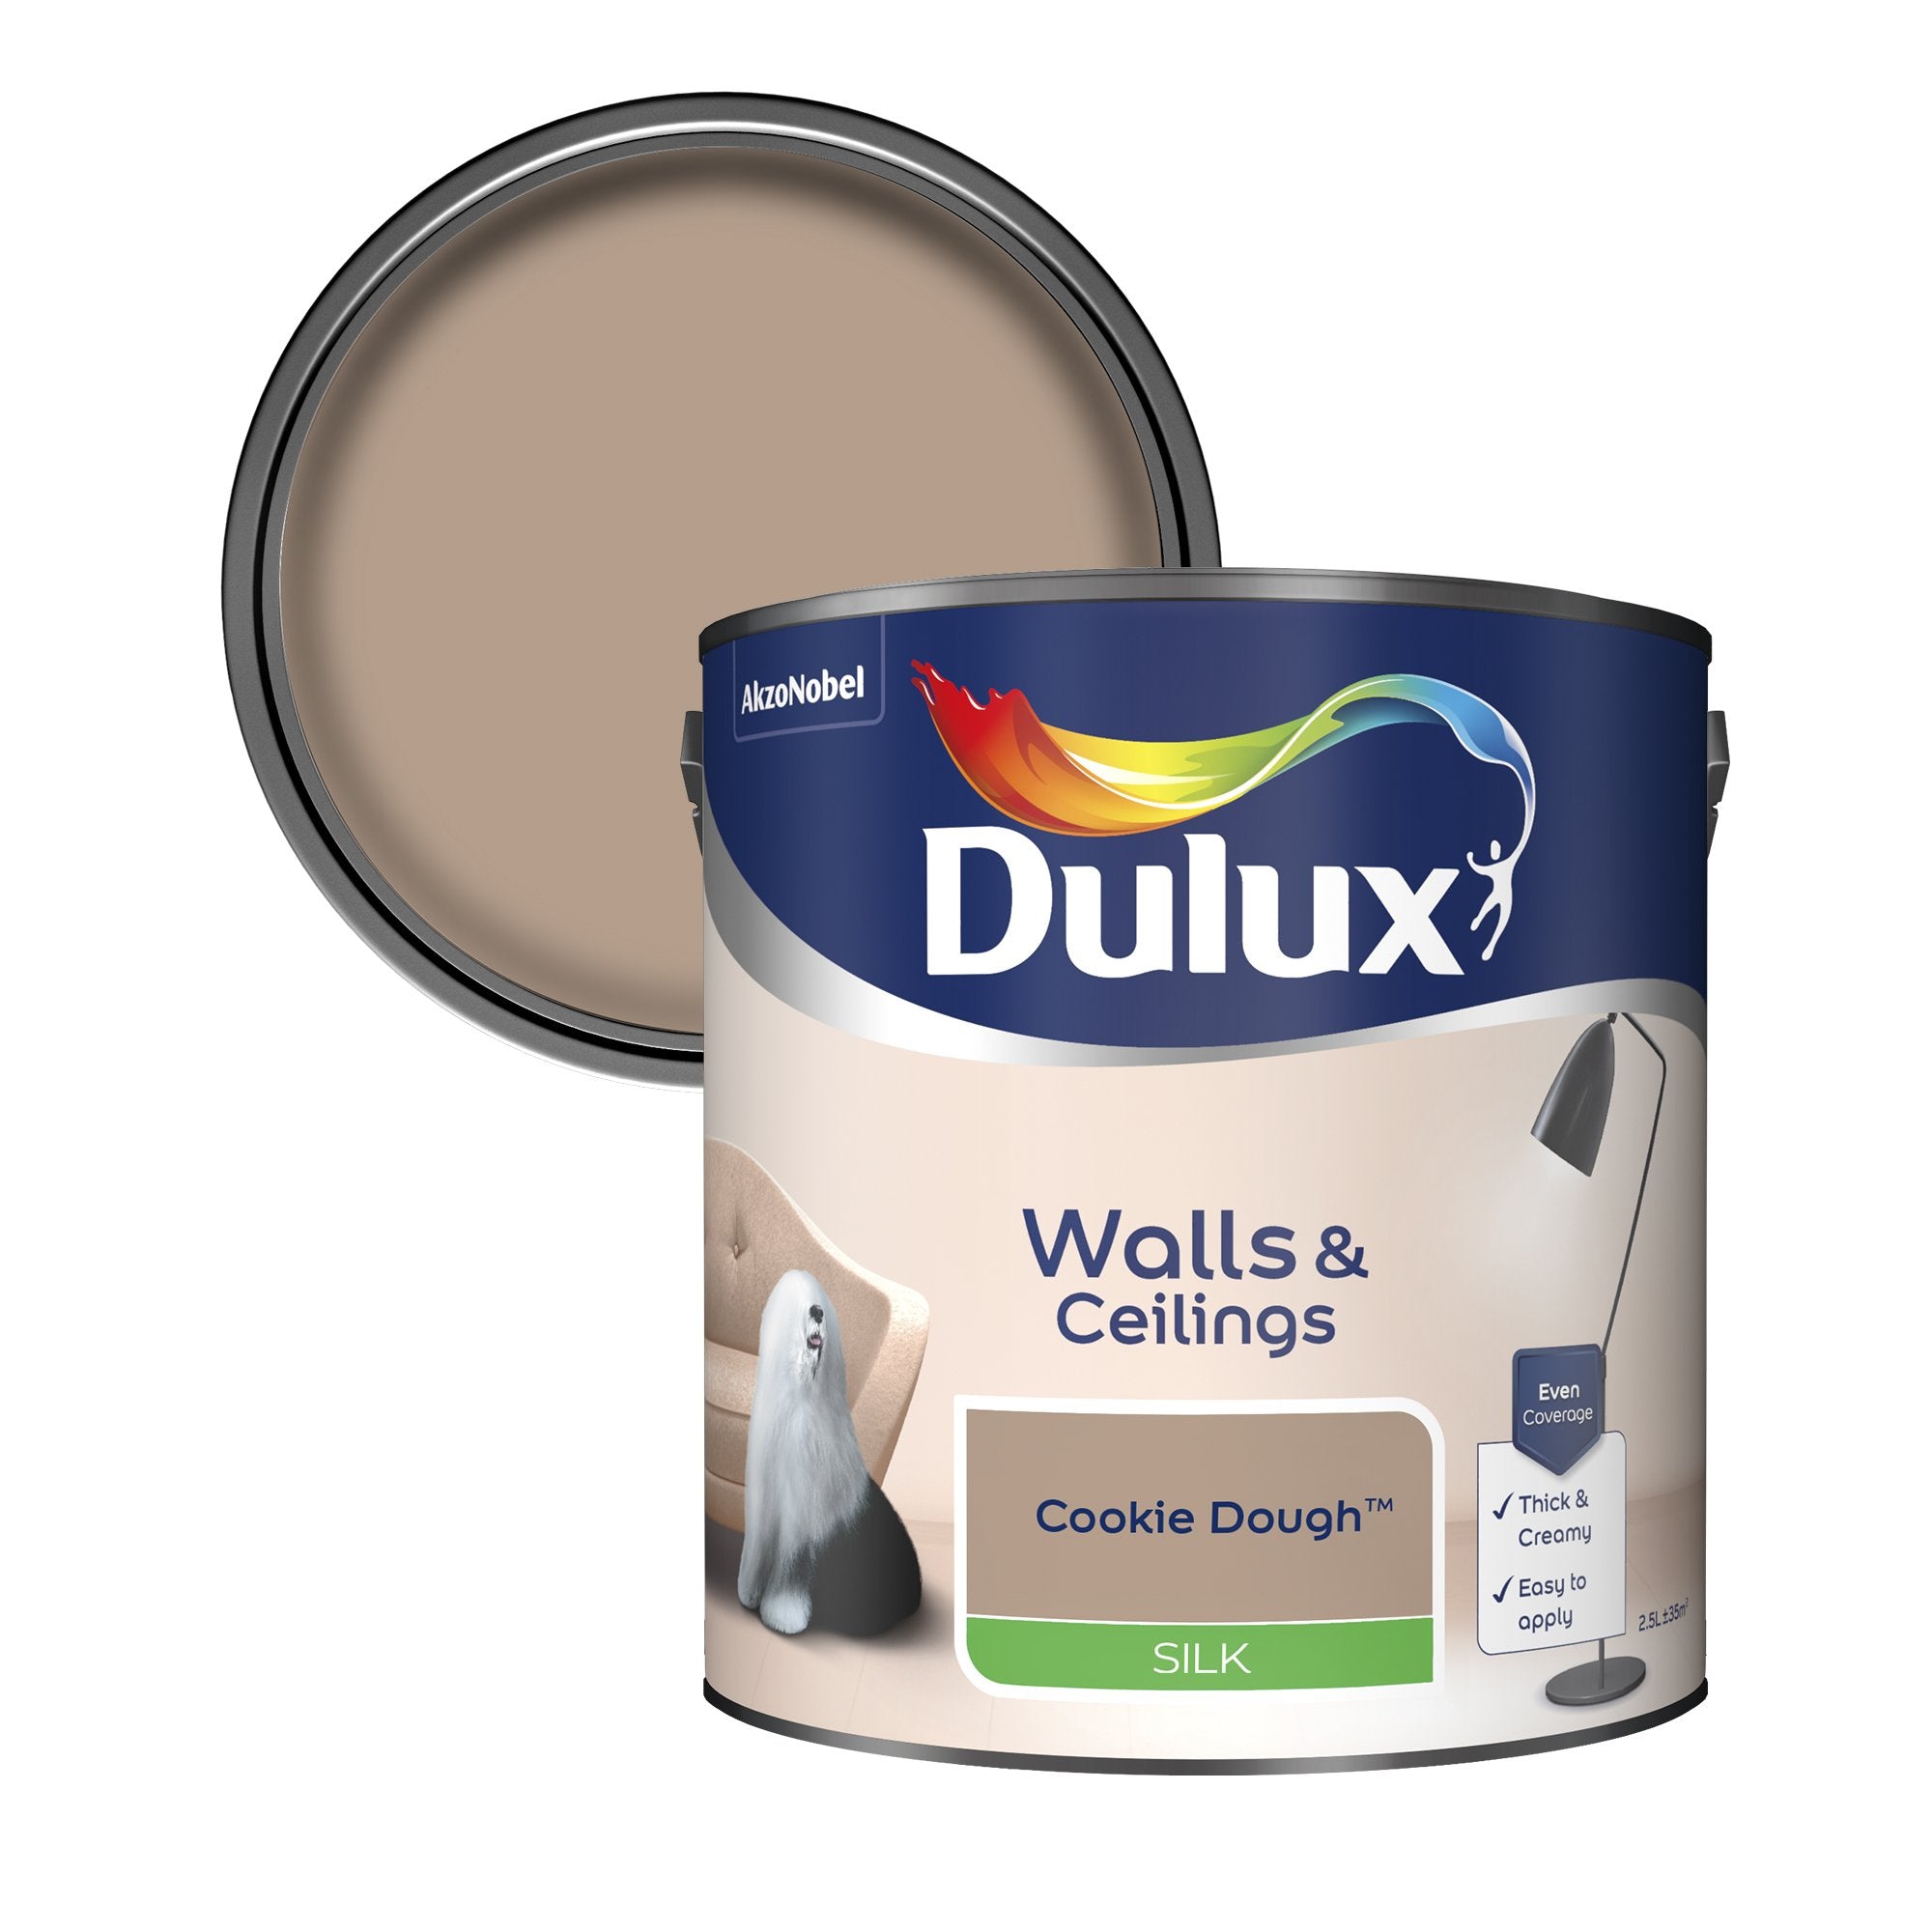 Dulux-Silk-Emulsion-Paint-For-Walls-And-Ceilings-Cookie-Dough-2.5L